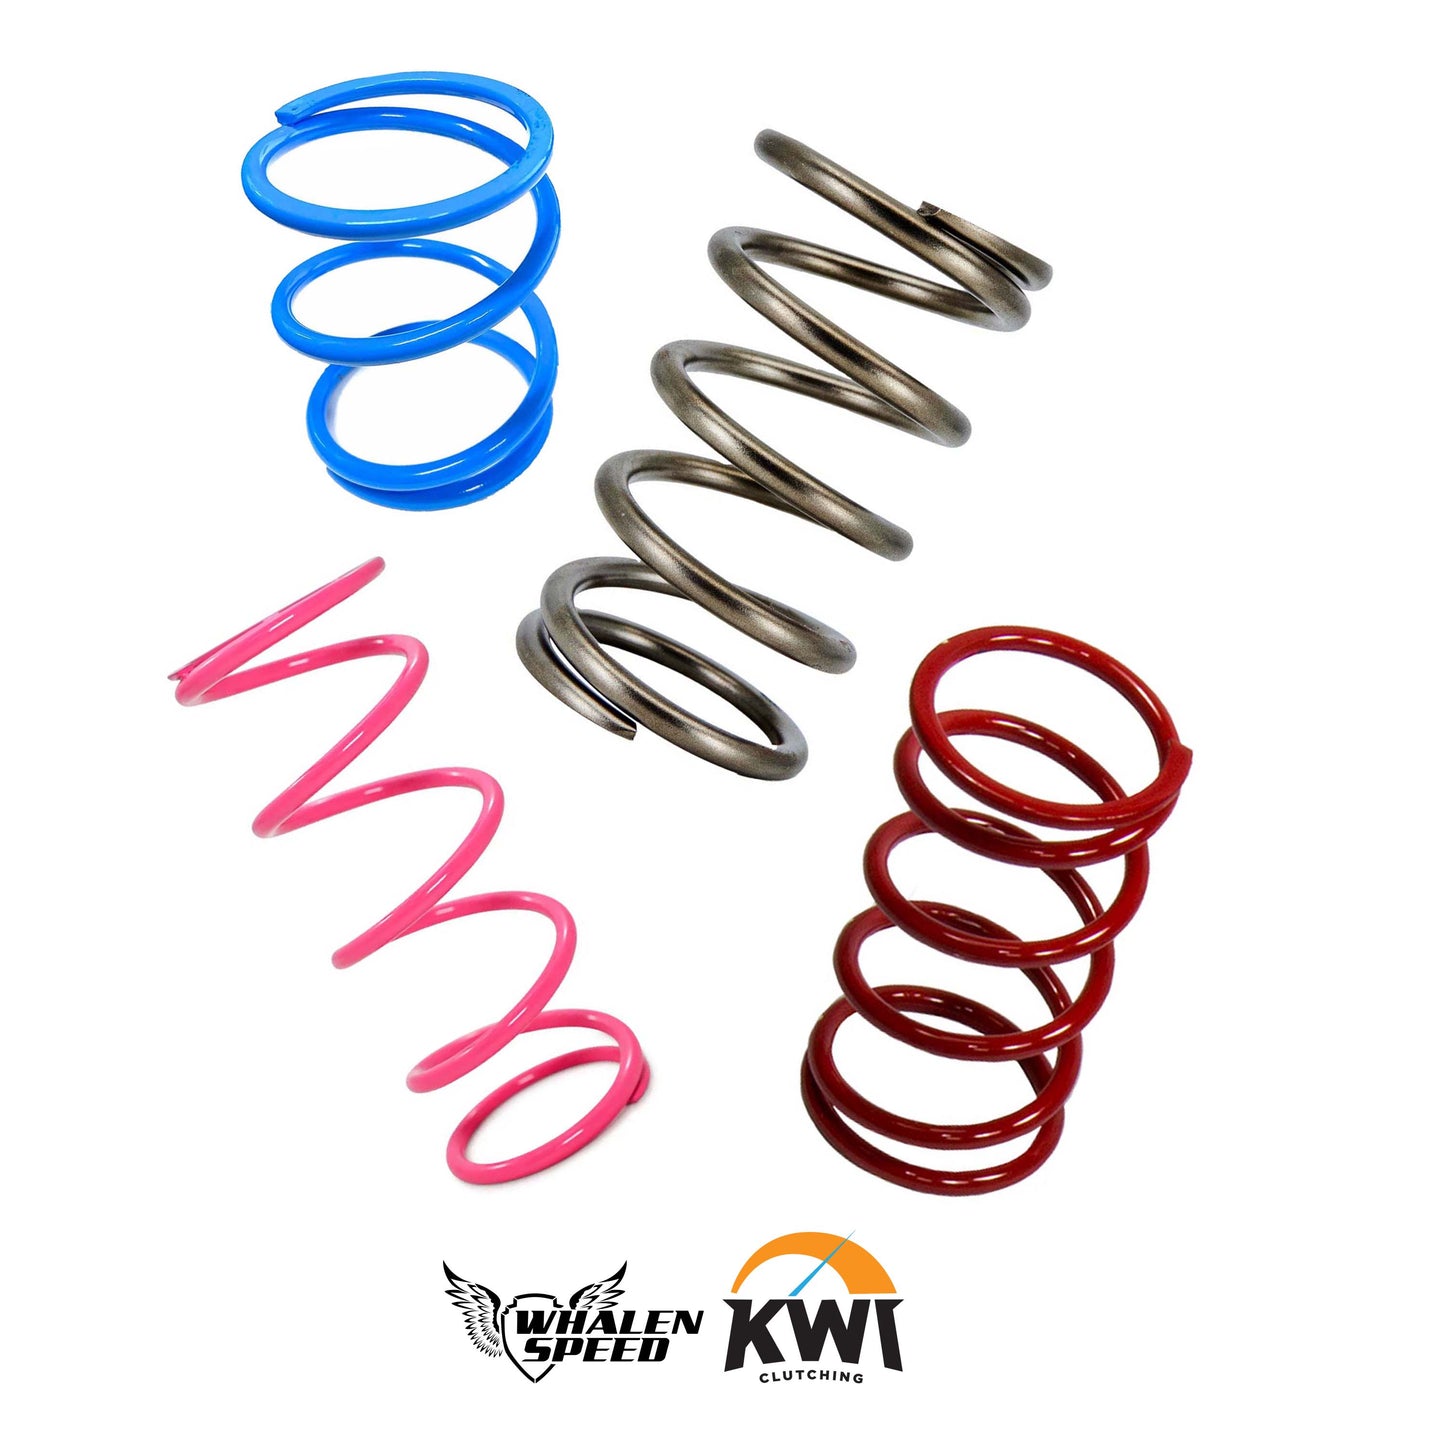 WSRD x KWI High Engagement Launch Control Springs | Can-Am X3 & Polaris RZR